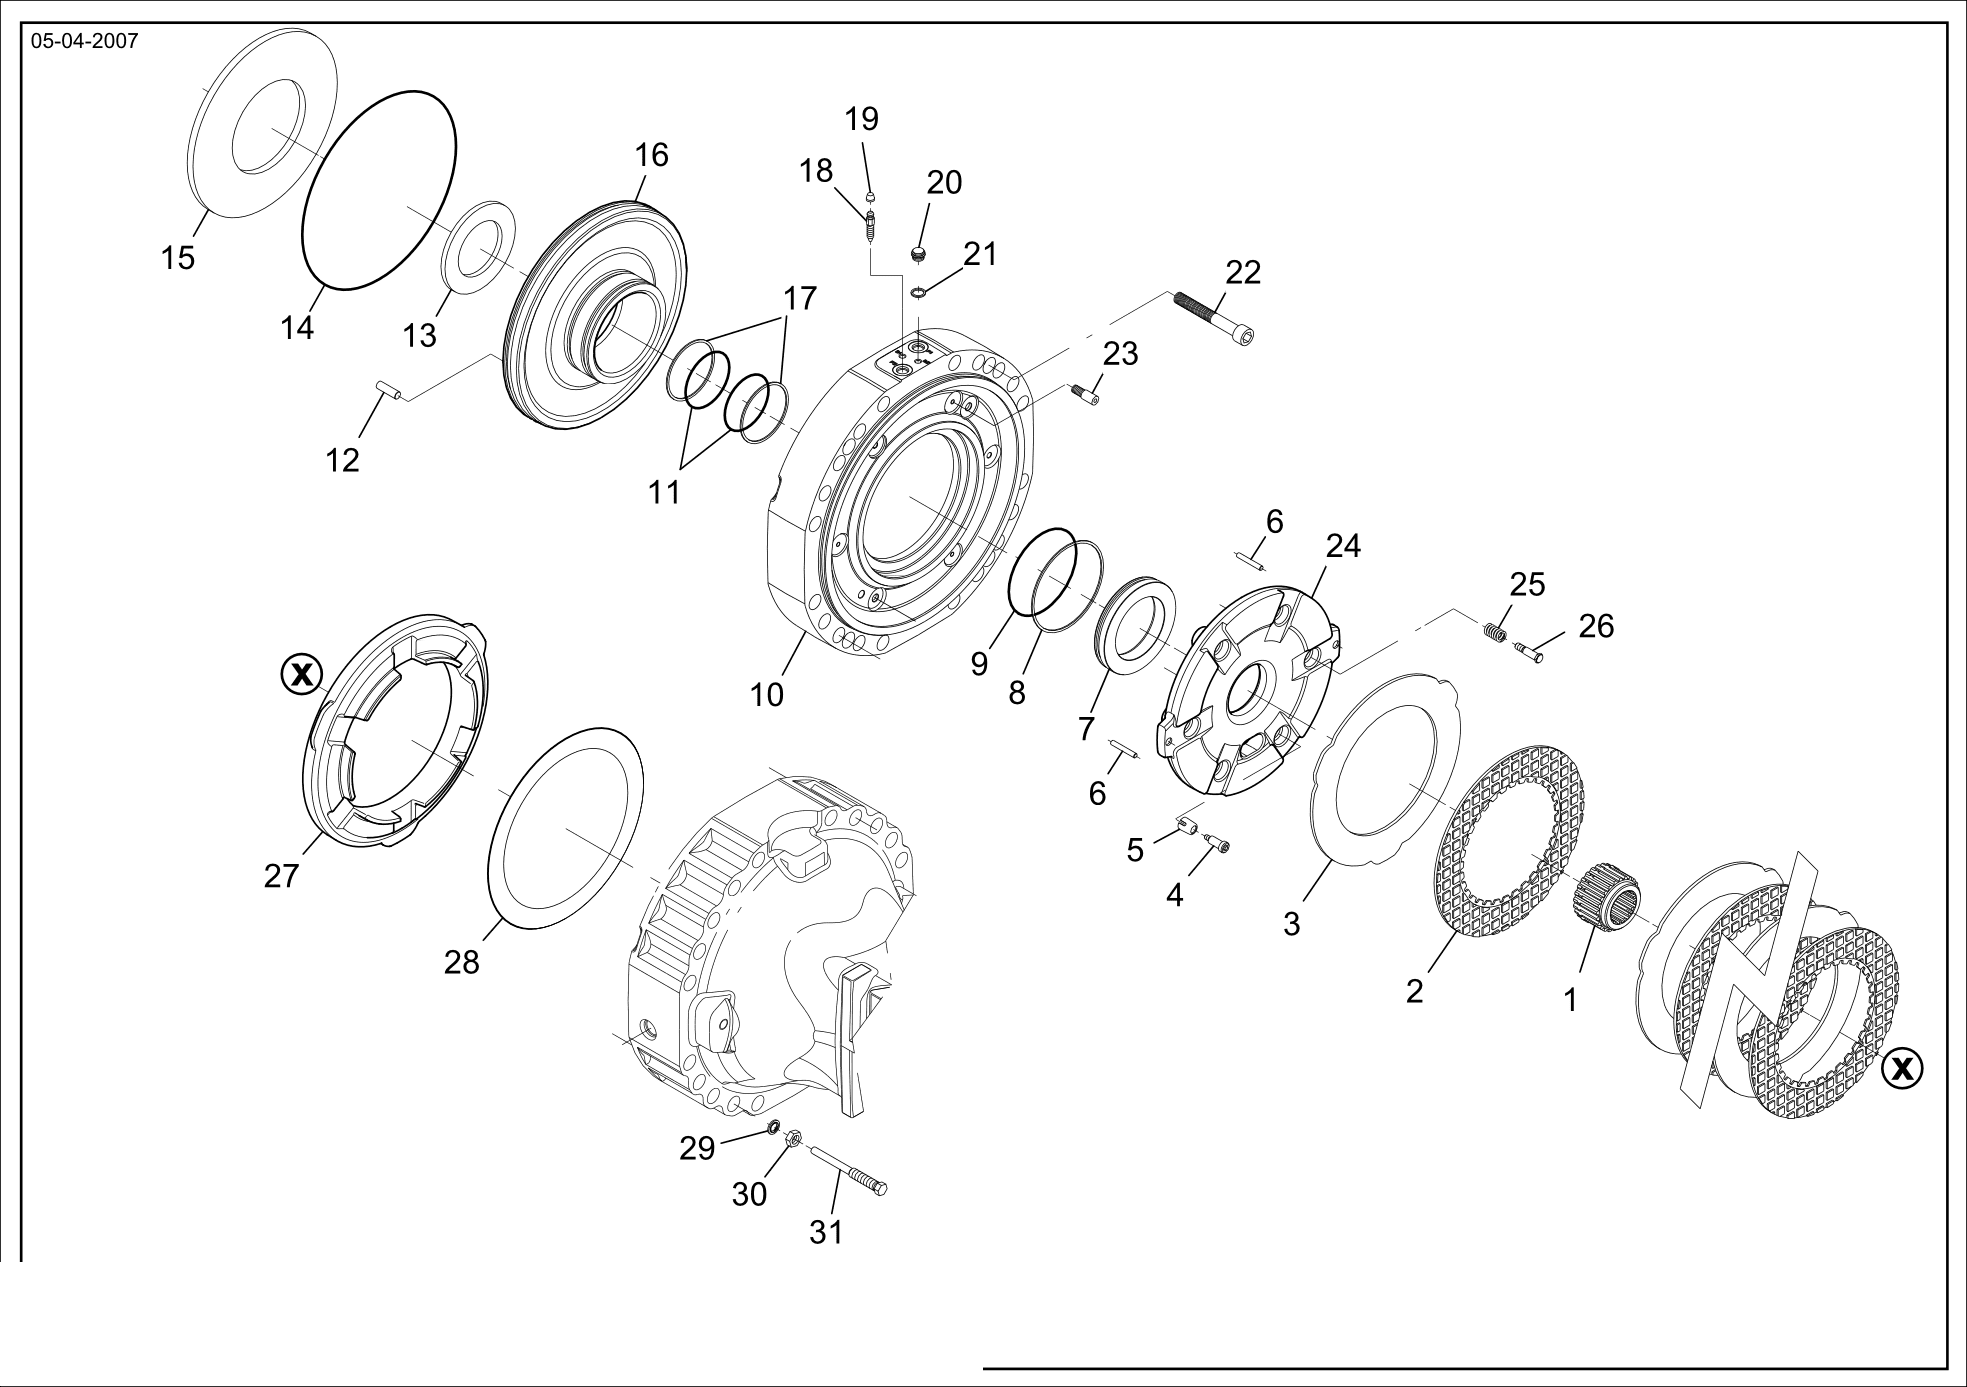 drawing for Hyundai Construction Equipment 006.05.0202 - Nut (figure 4)